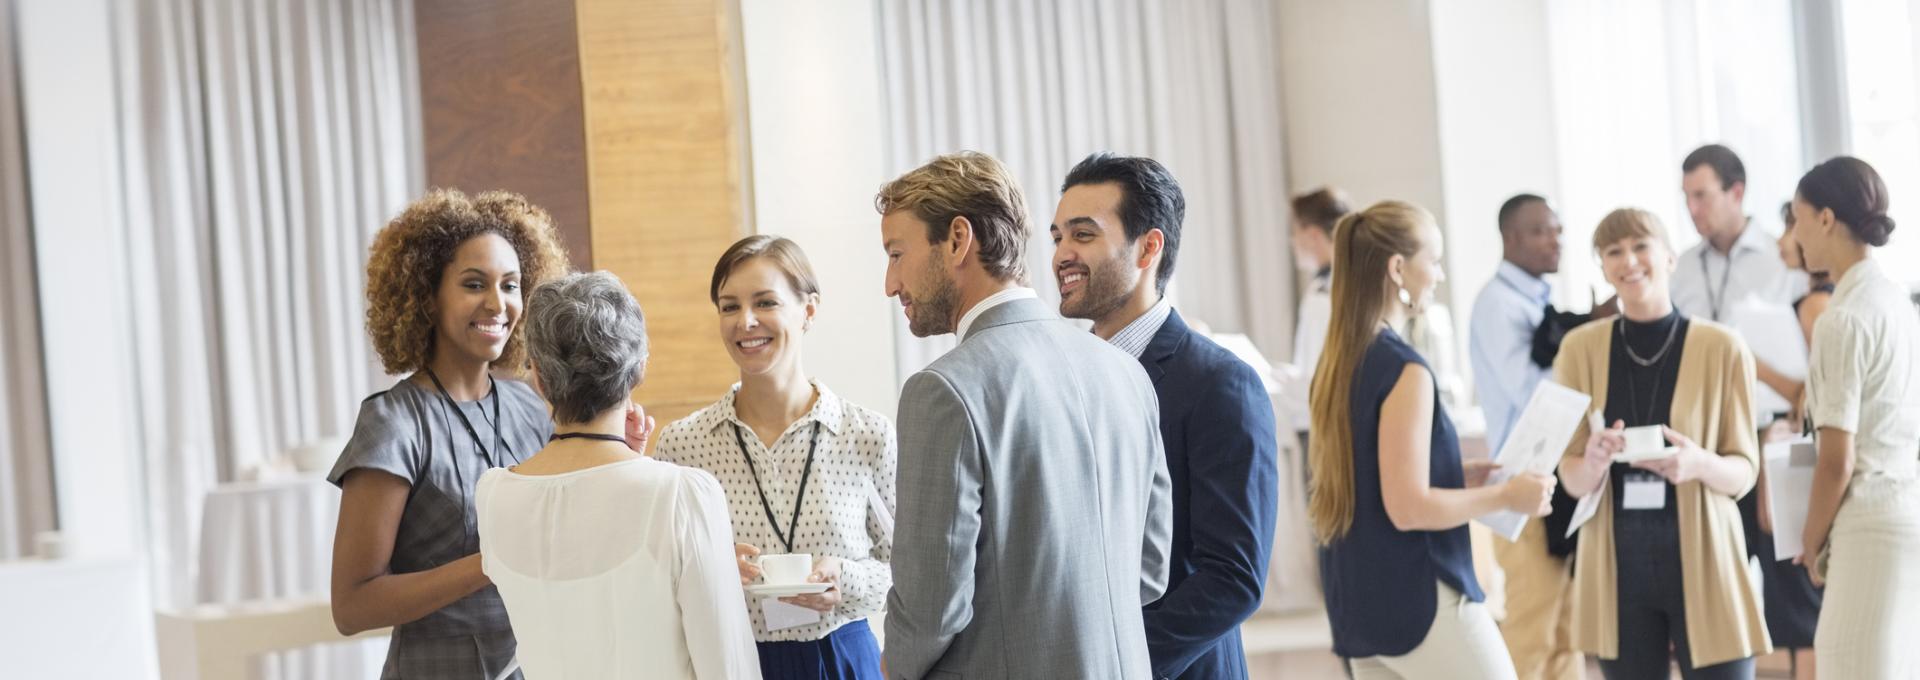 Group of business people standing in hall, smiling and talking together stock photo